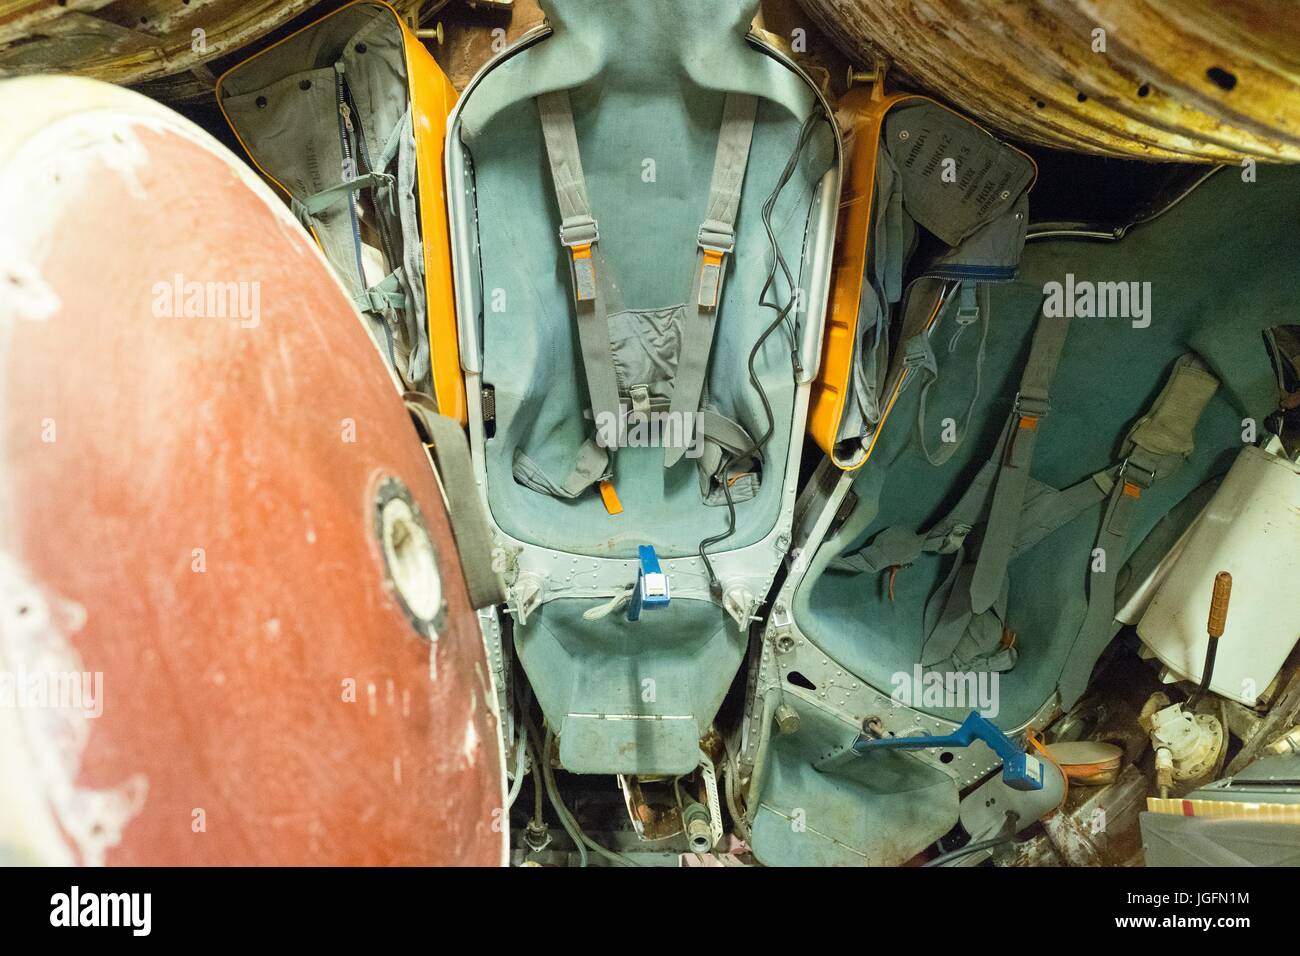 Interior of a Russian Soyuz space capsule, with astronaut seats, hatch and  controls visible, June 15, 2017 Stock Photo - Alamy